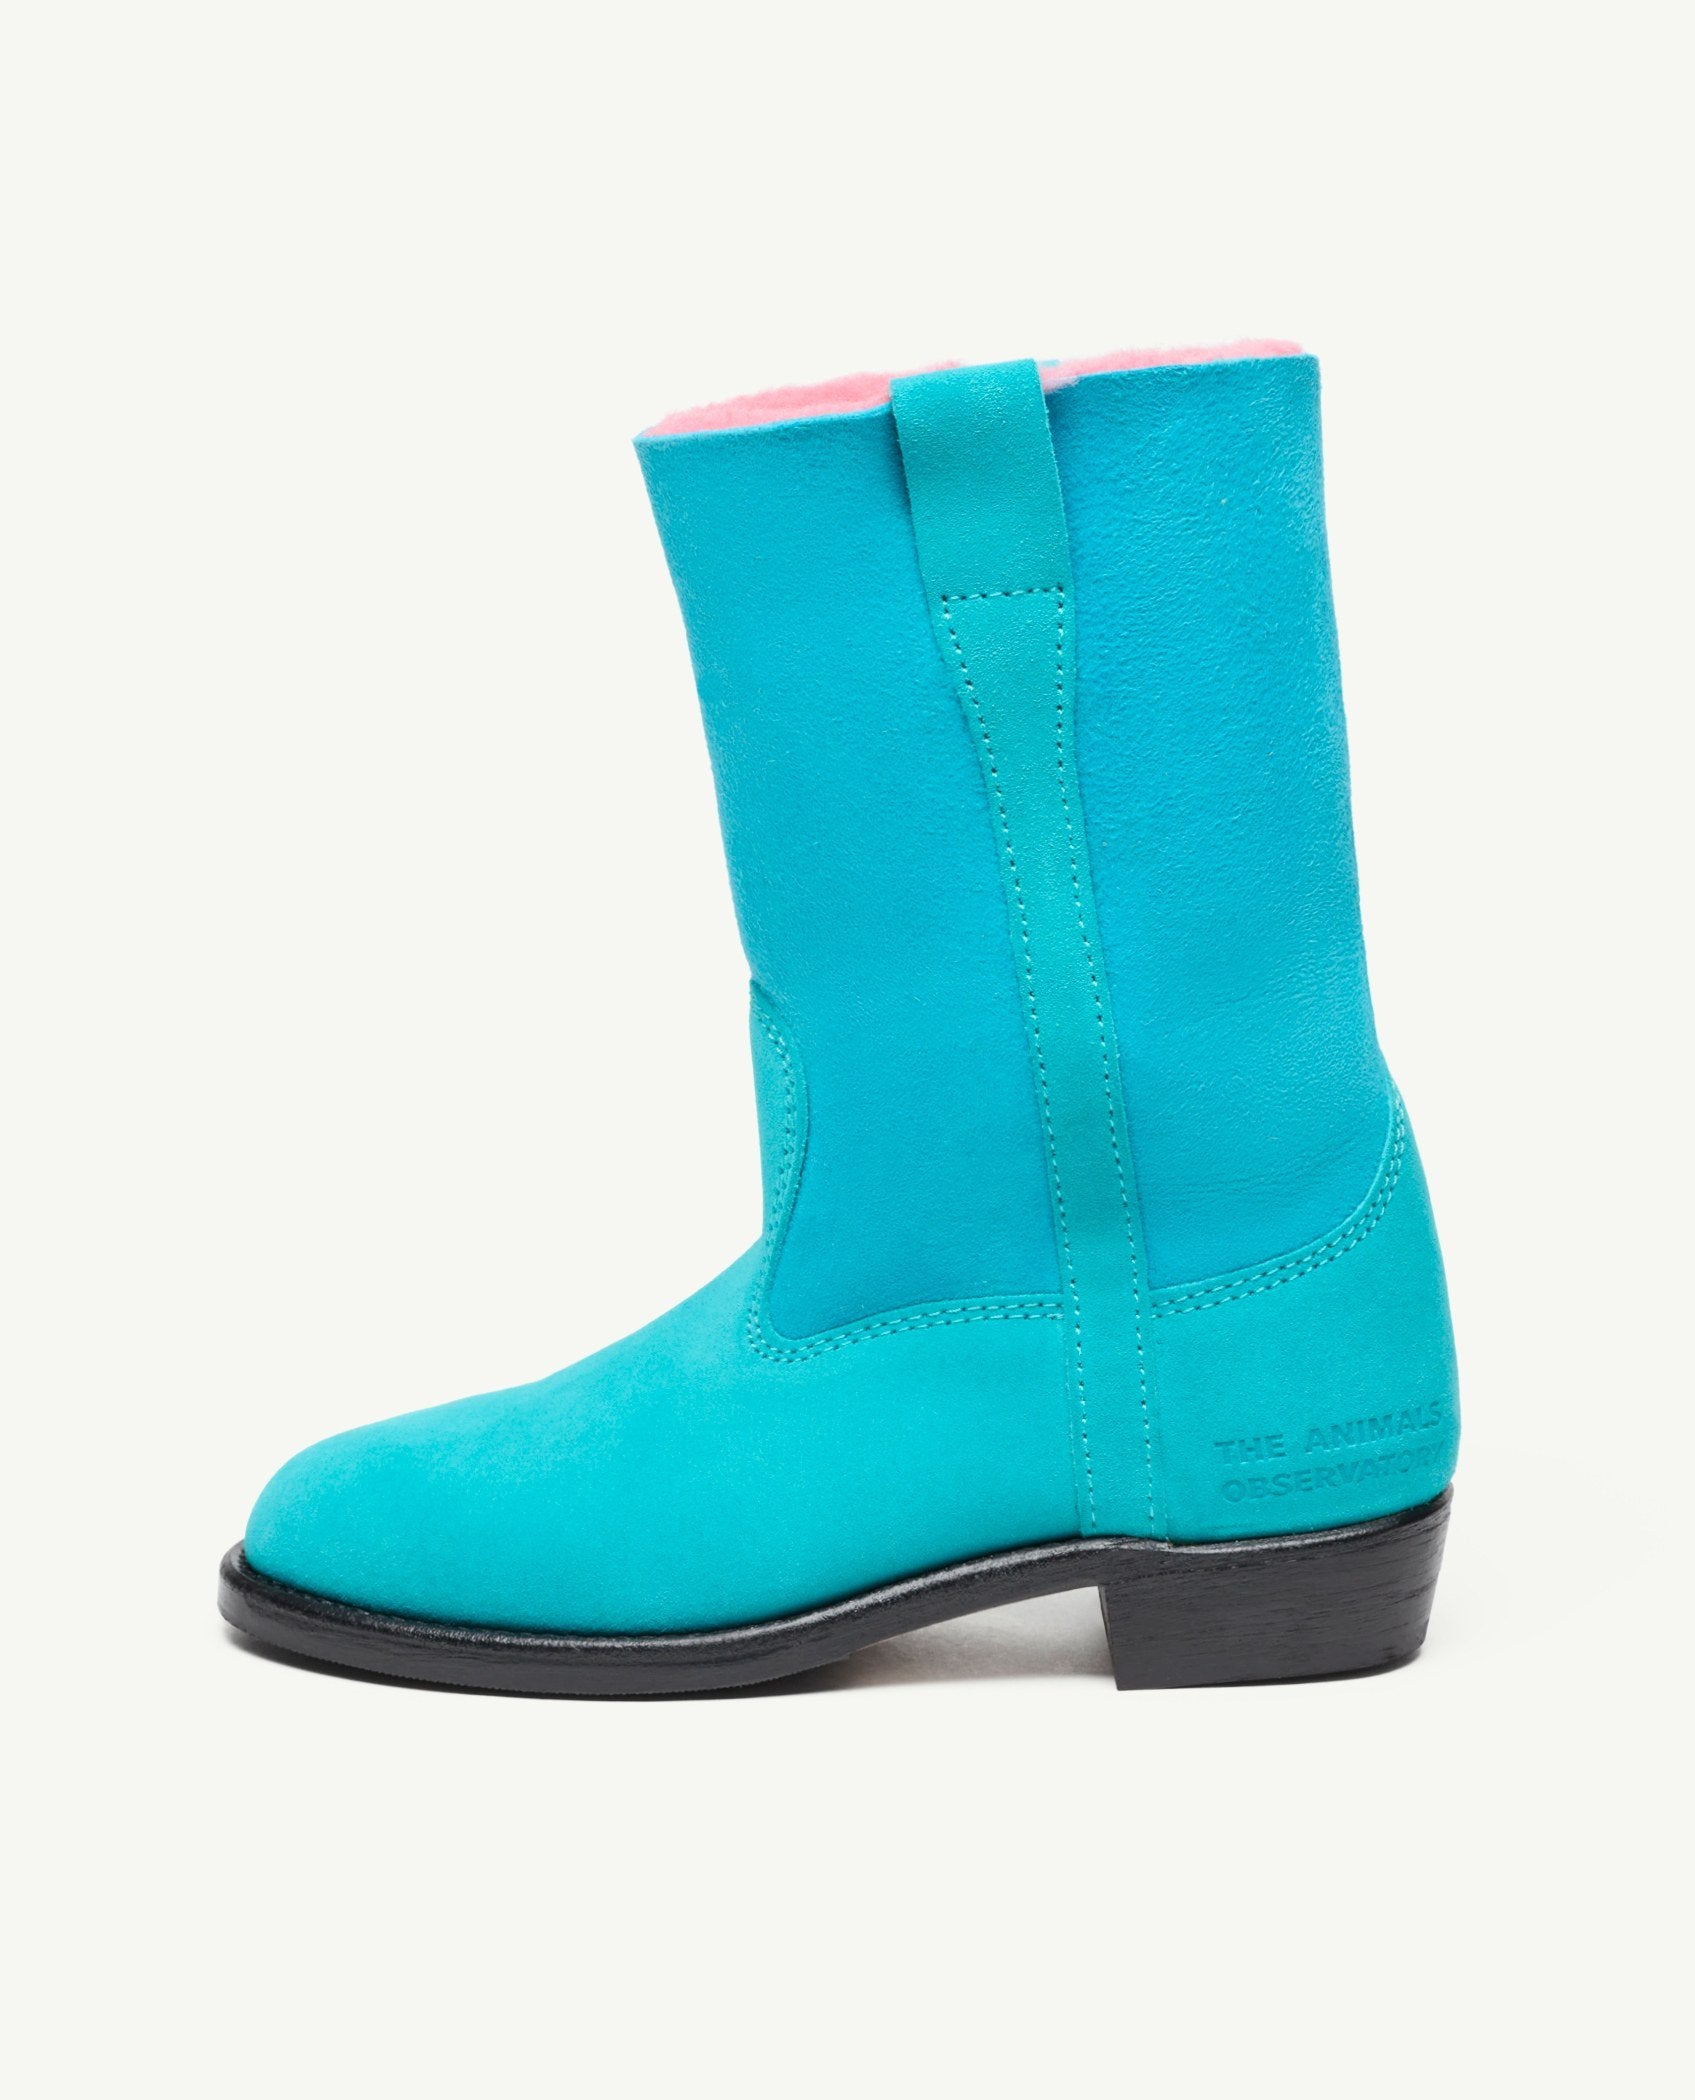 Electric Blue La Botte Gardiane x The Animals Observatory Boots PRODUCT BACK